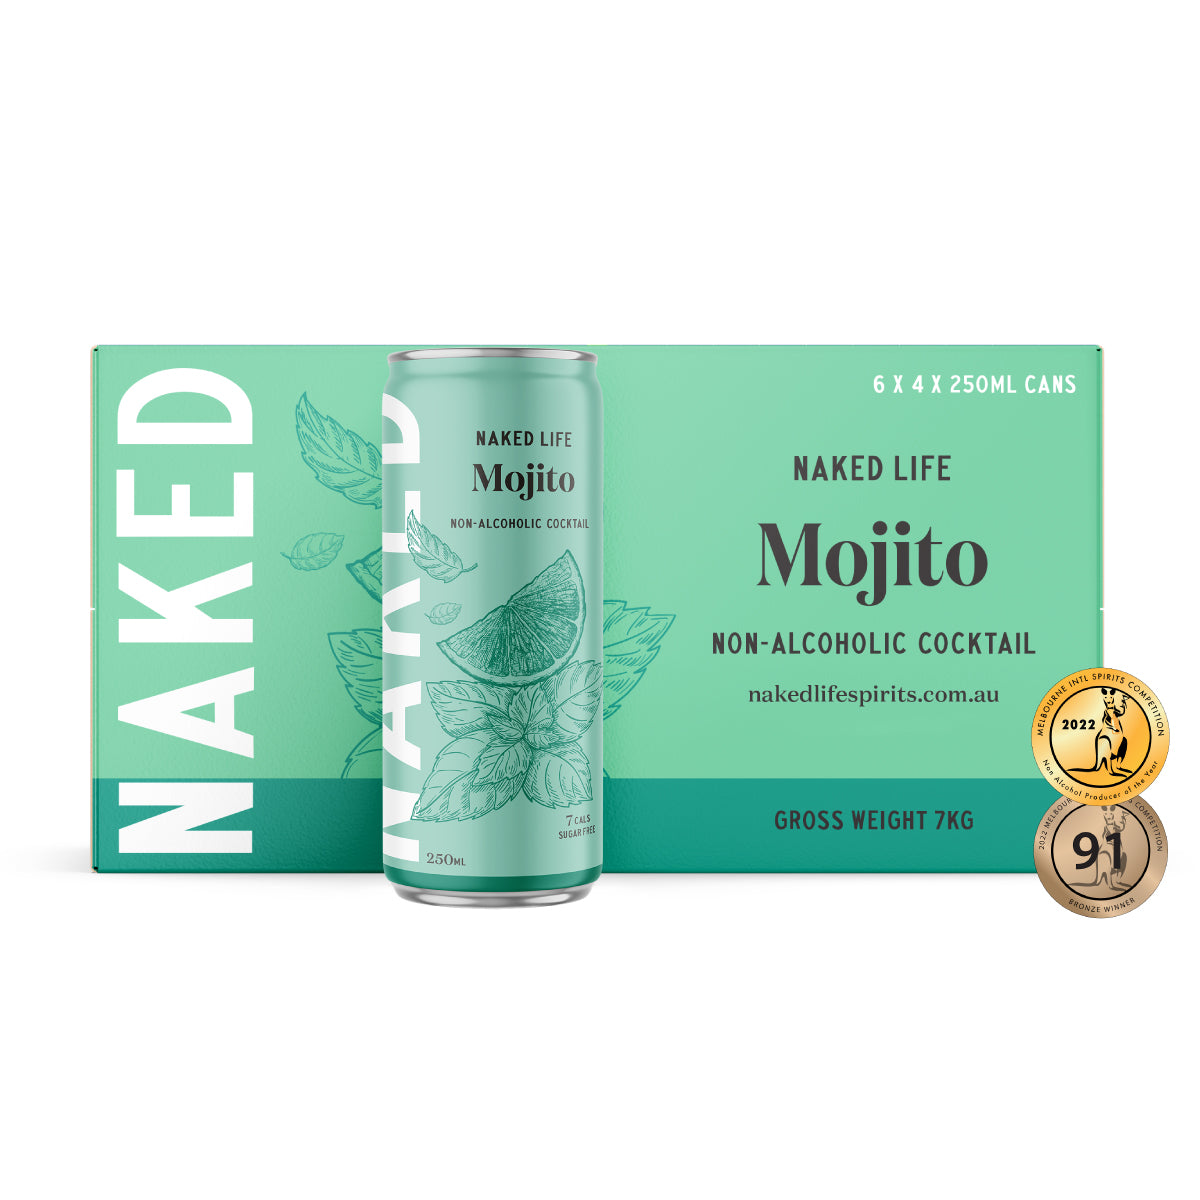 Naked Life Non-Alcoholic Cocktail Mojito - 6 x 4 x 250ml Cans